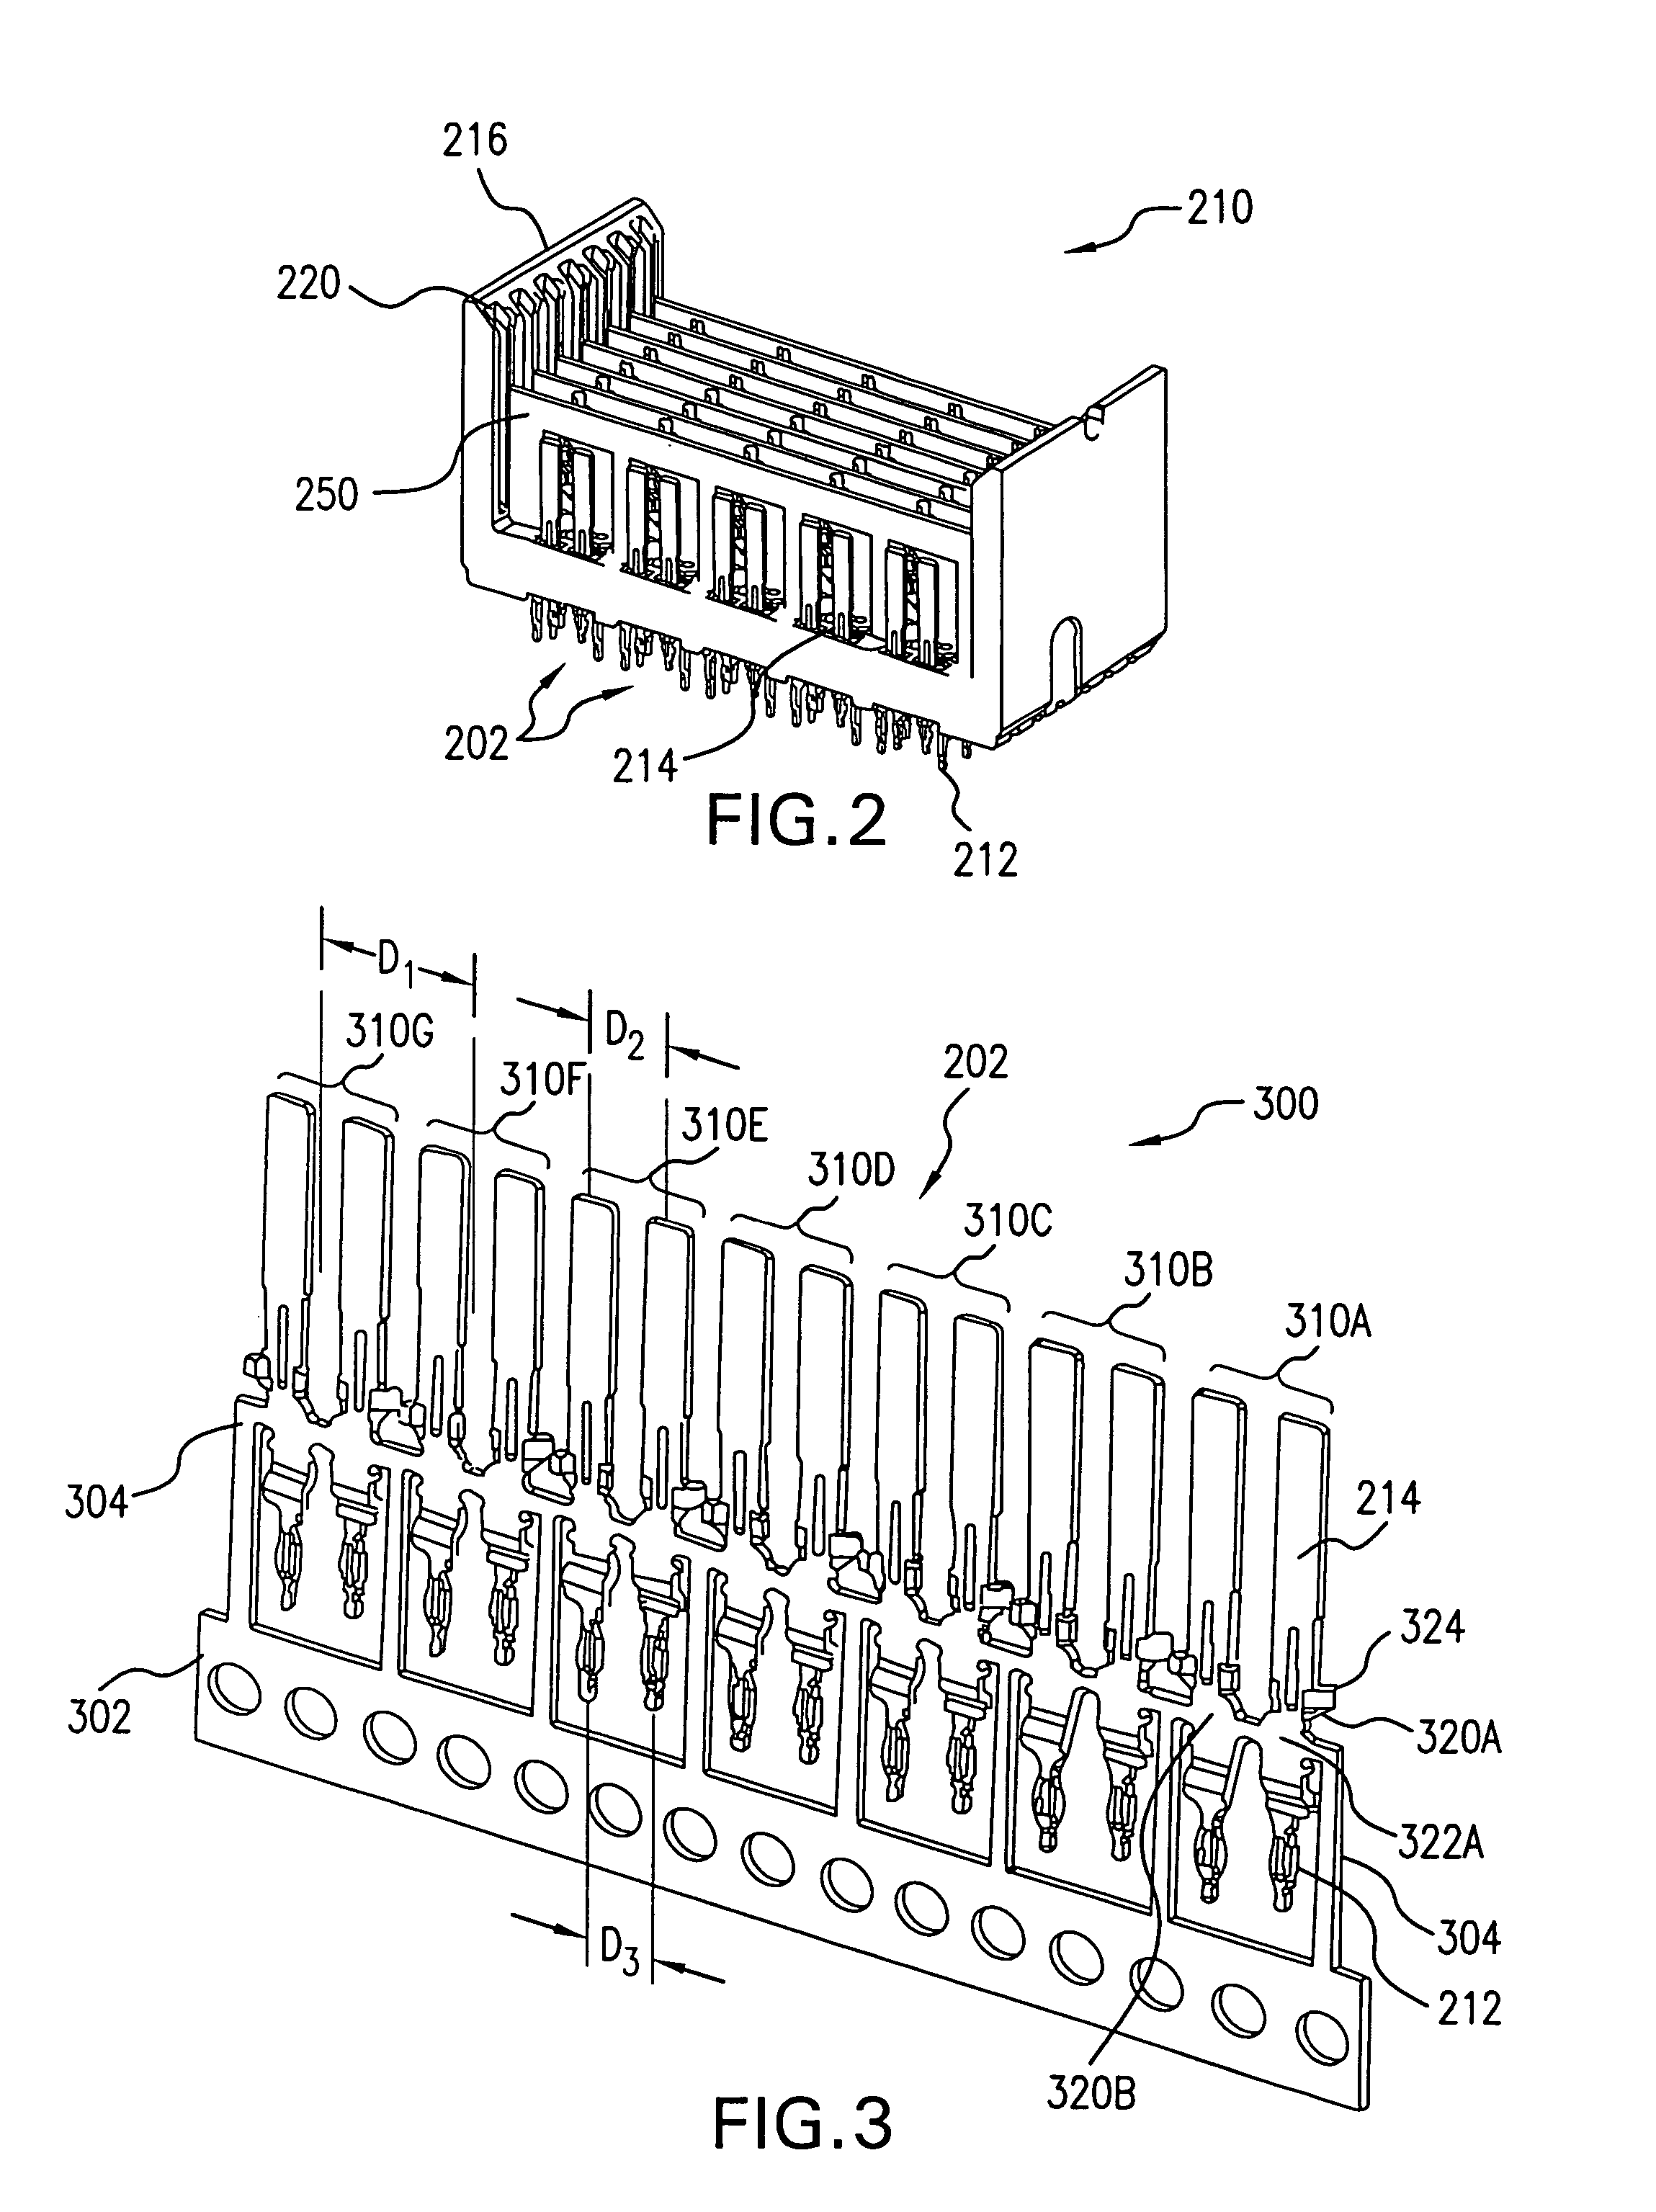 Electrical connector for interconnection assembly